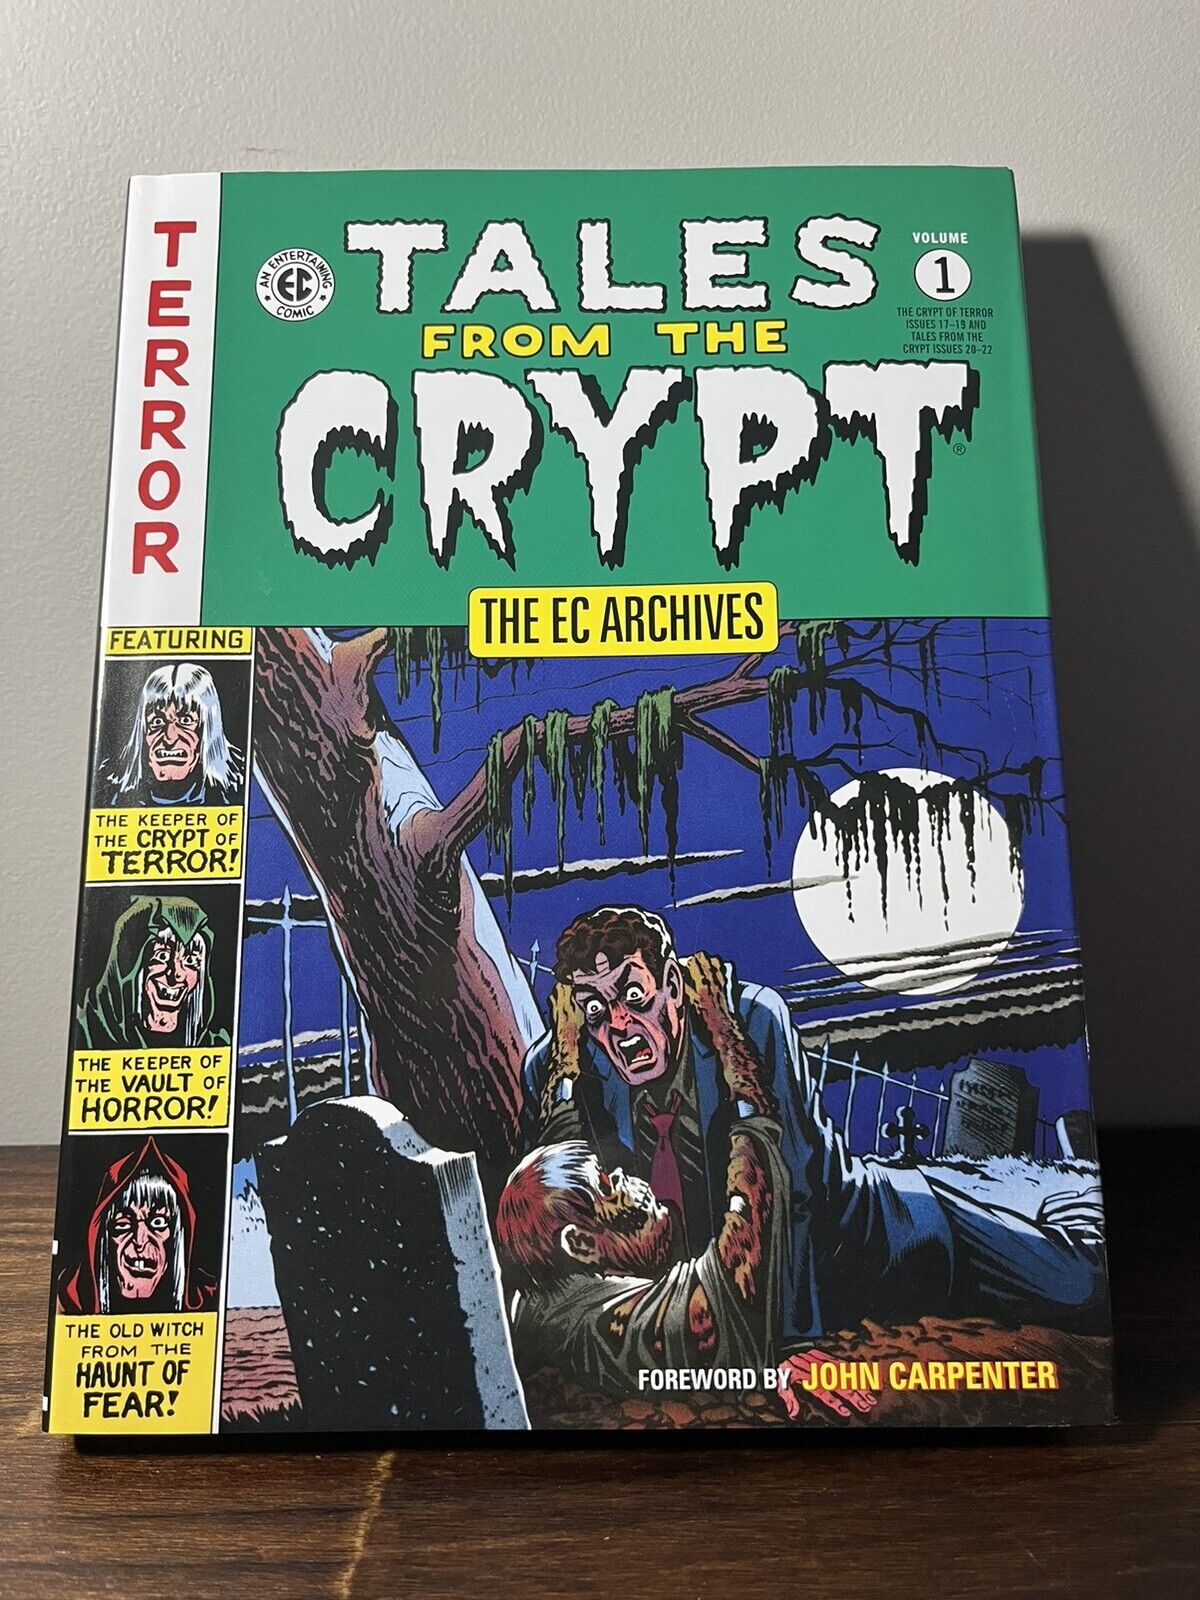 The EC Archives: Tales from the Crypt Volume 1 Hardcover - out of print